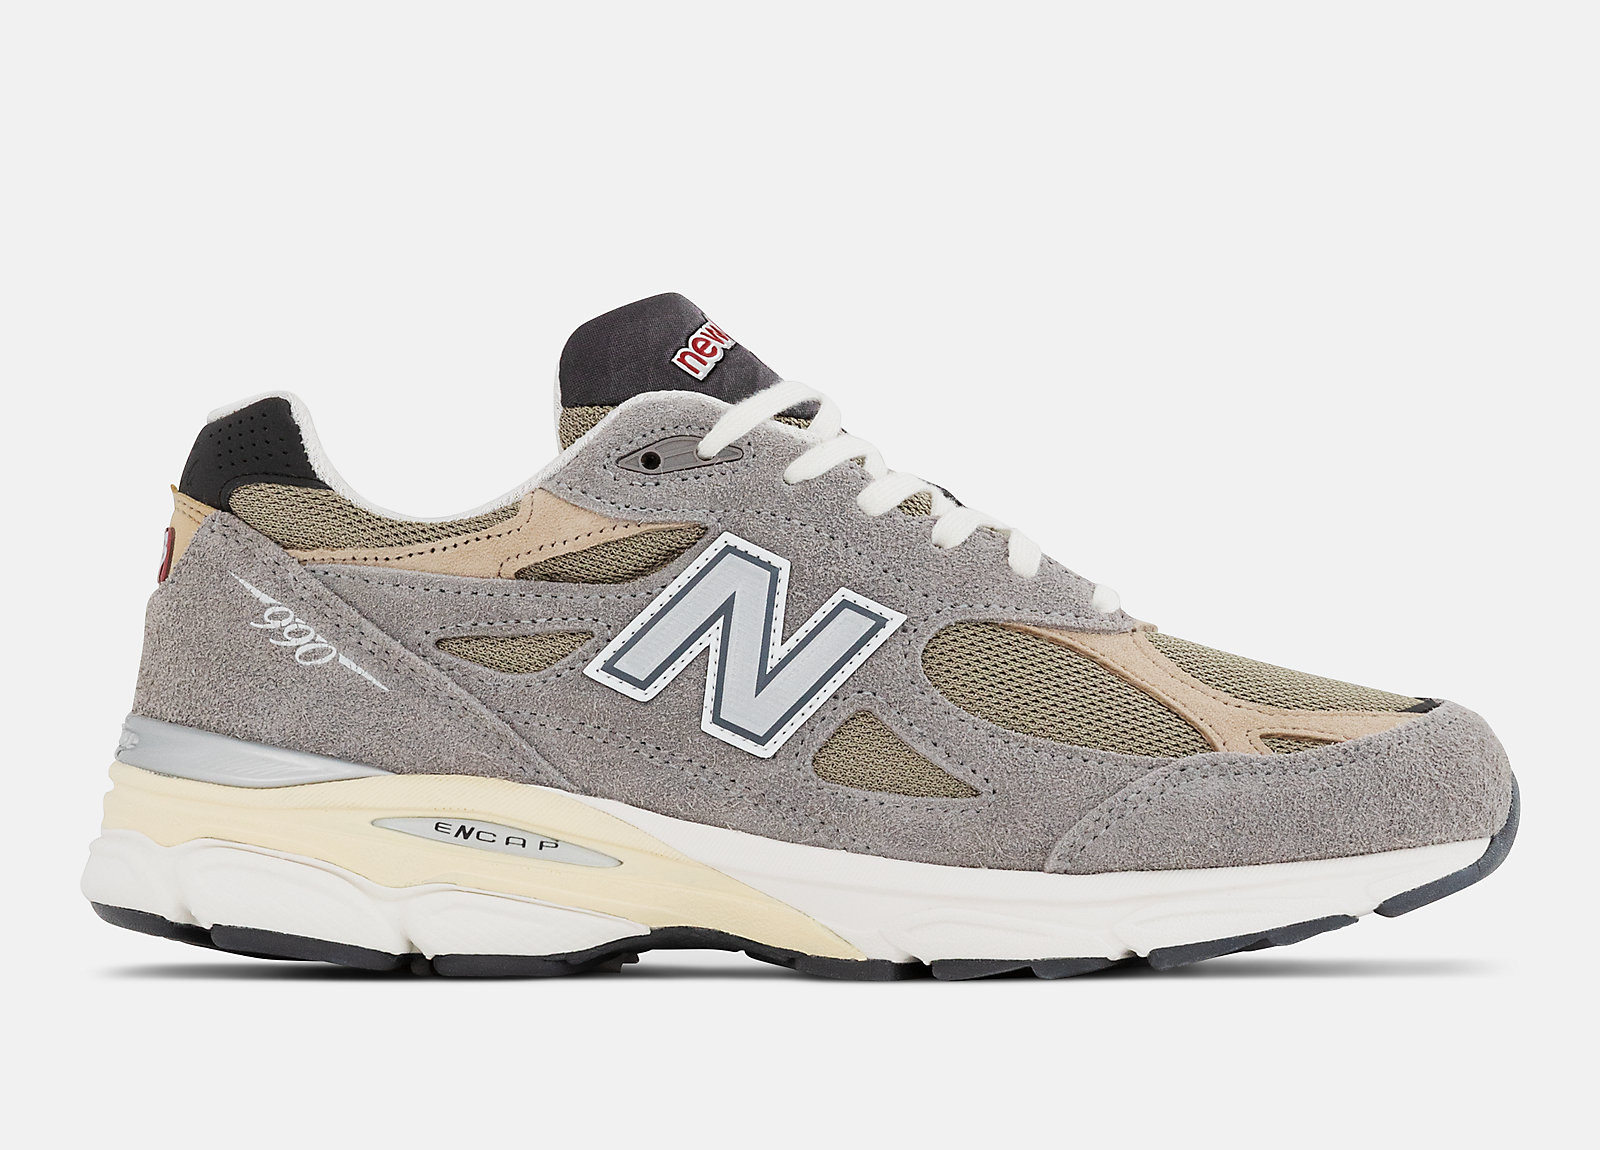 New Balance 990v3
Made In USA
« Marblehead »